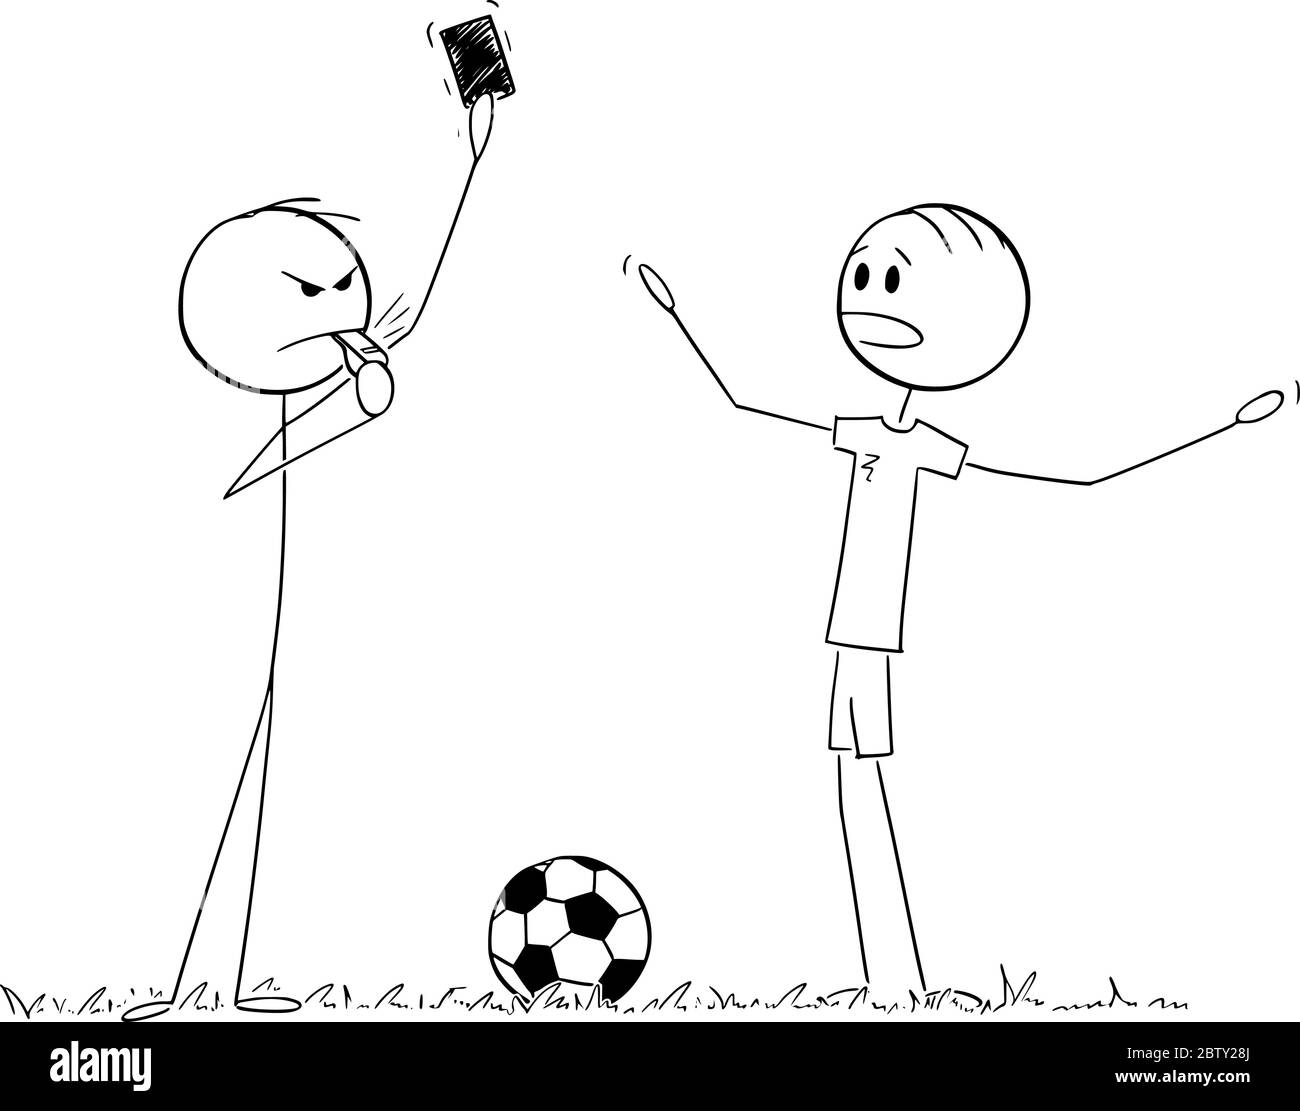 Vector cartoon stick figure drawing conceptual illustration of serious football or soccer referee showing red card to player. Stock Vector